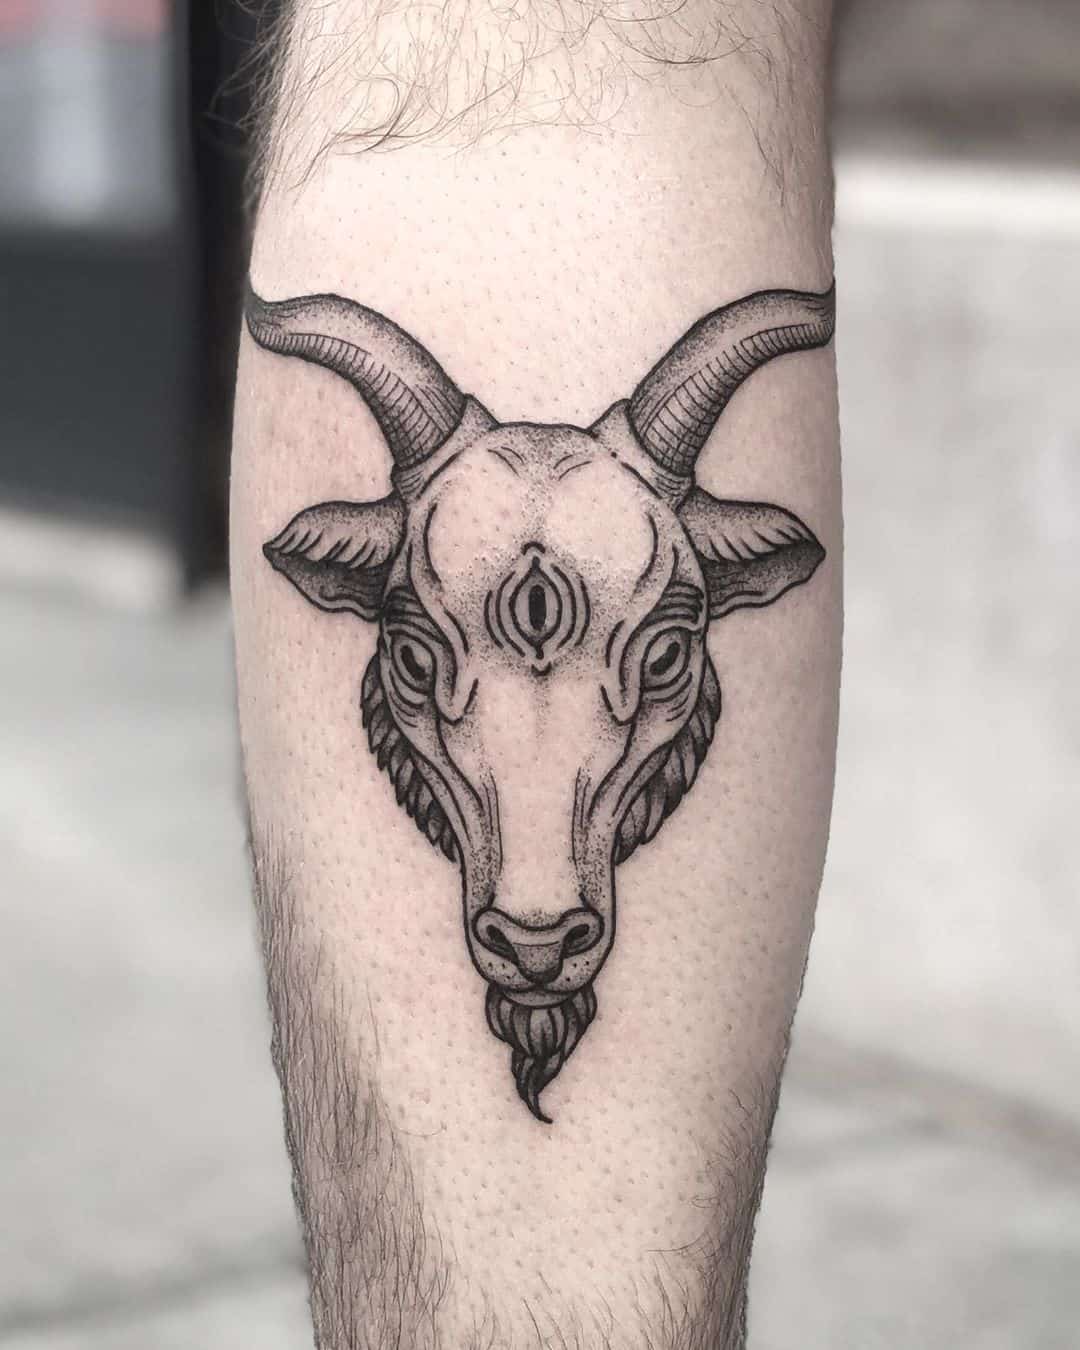 Goat Tattoo Vector Images over 2300